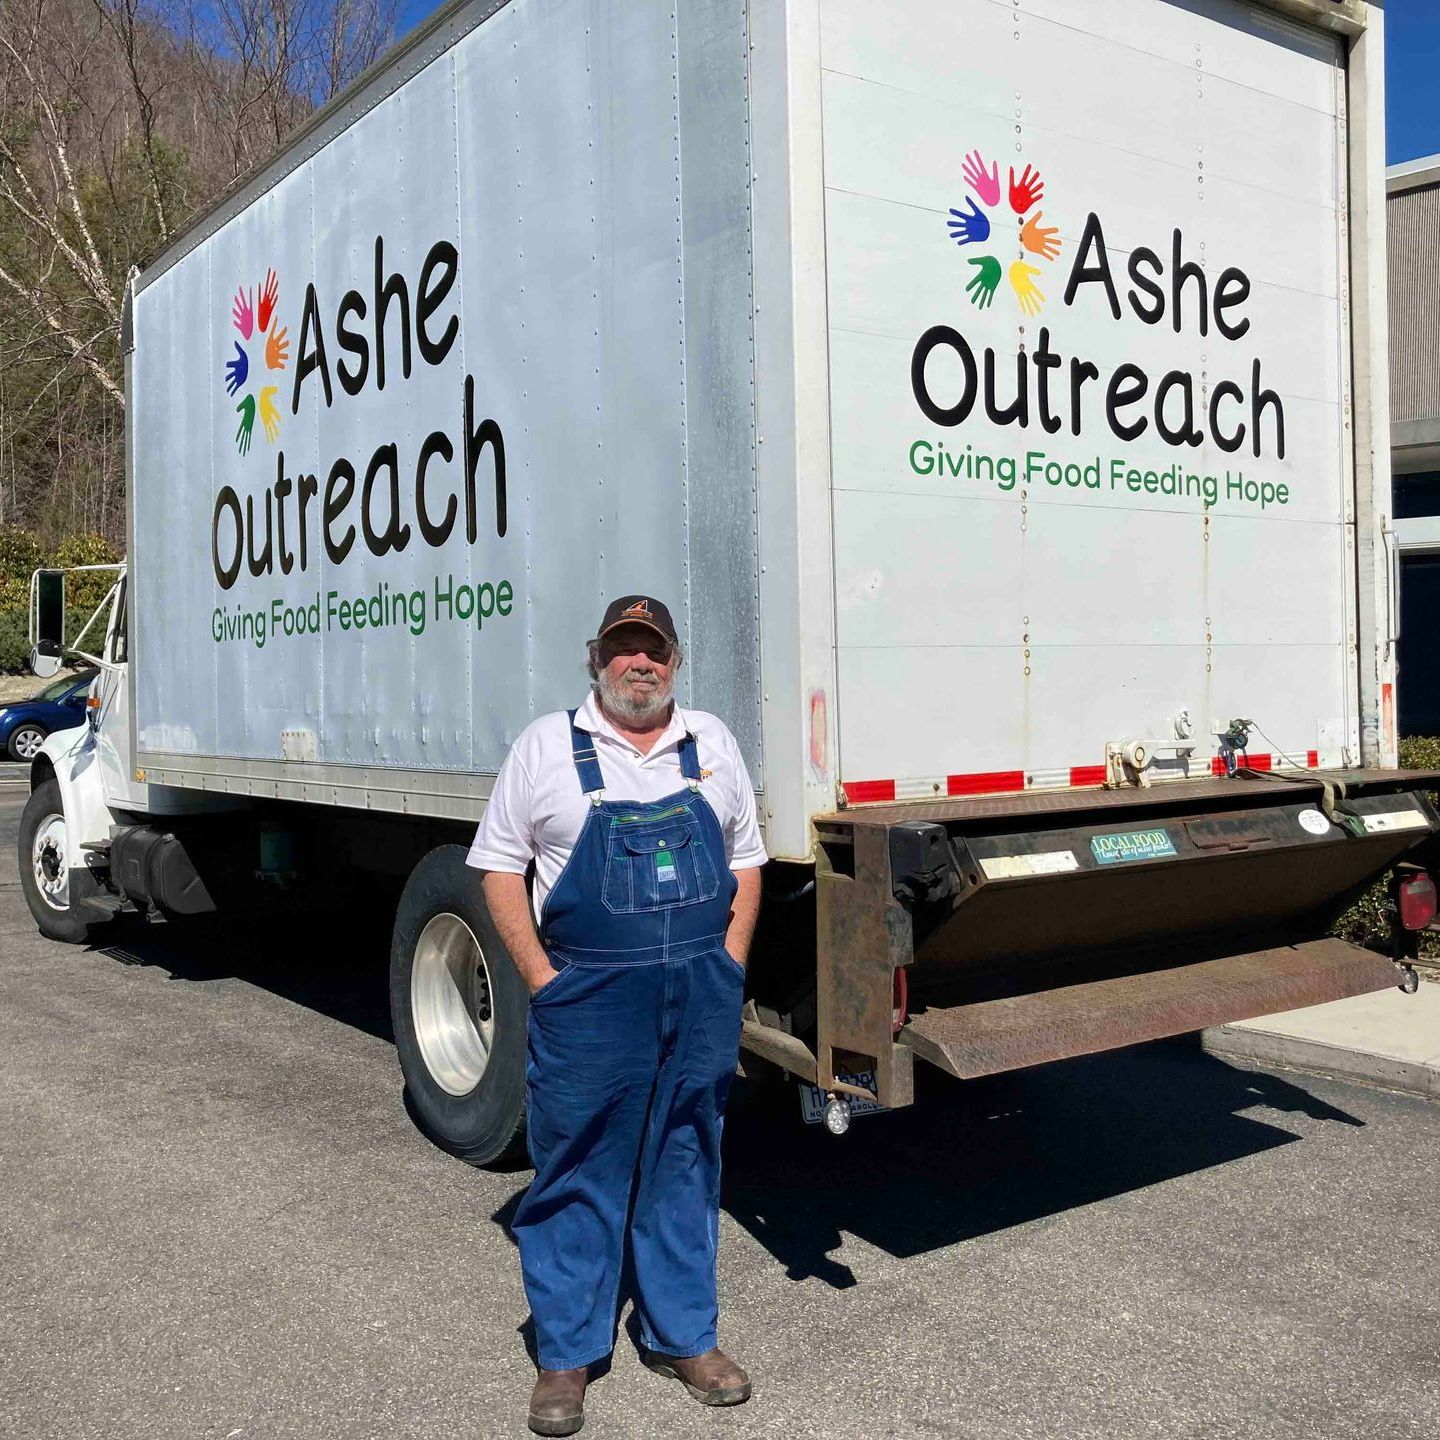 A man in overalls is standing in front of an ash outreach truck